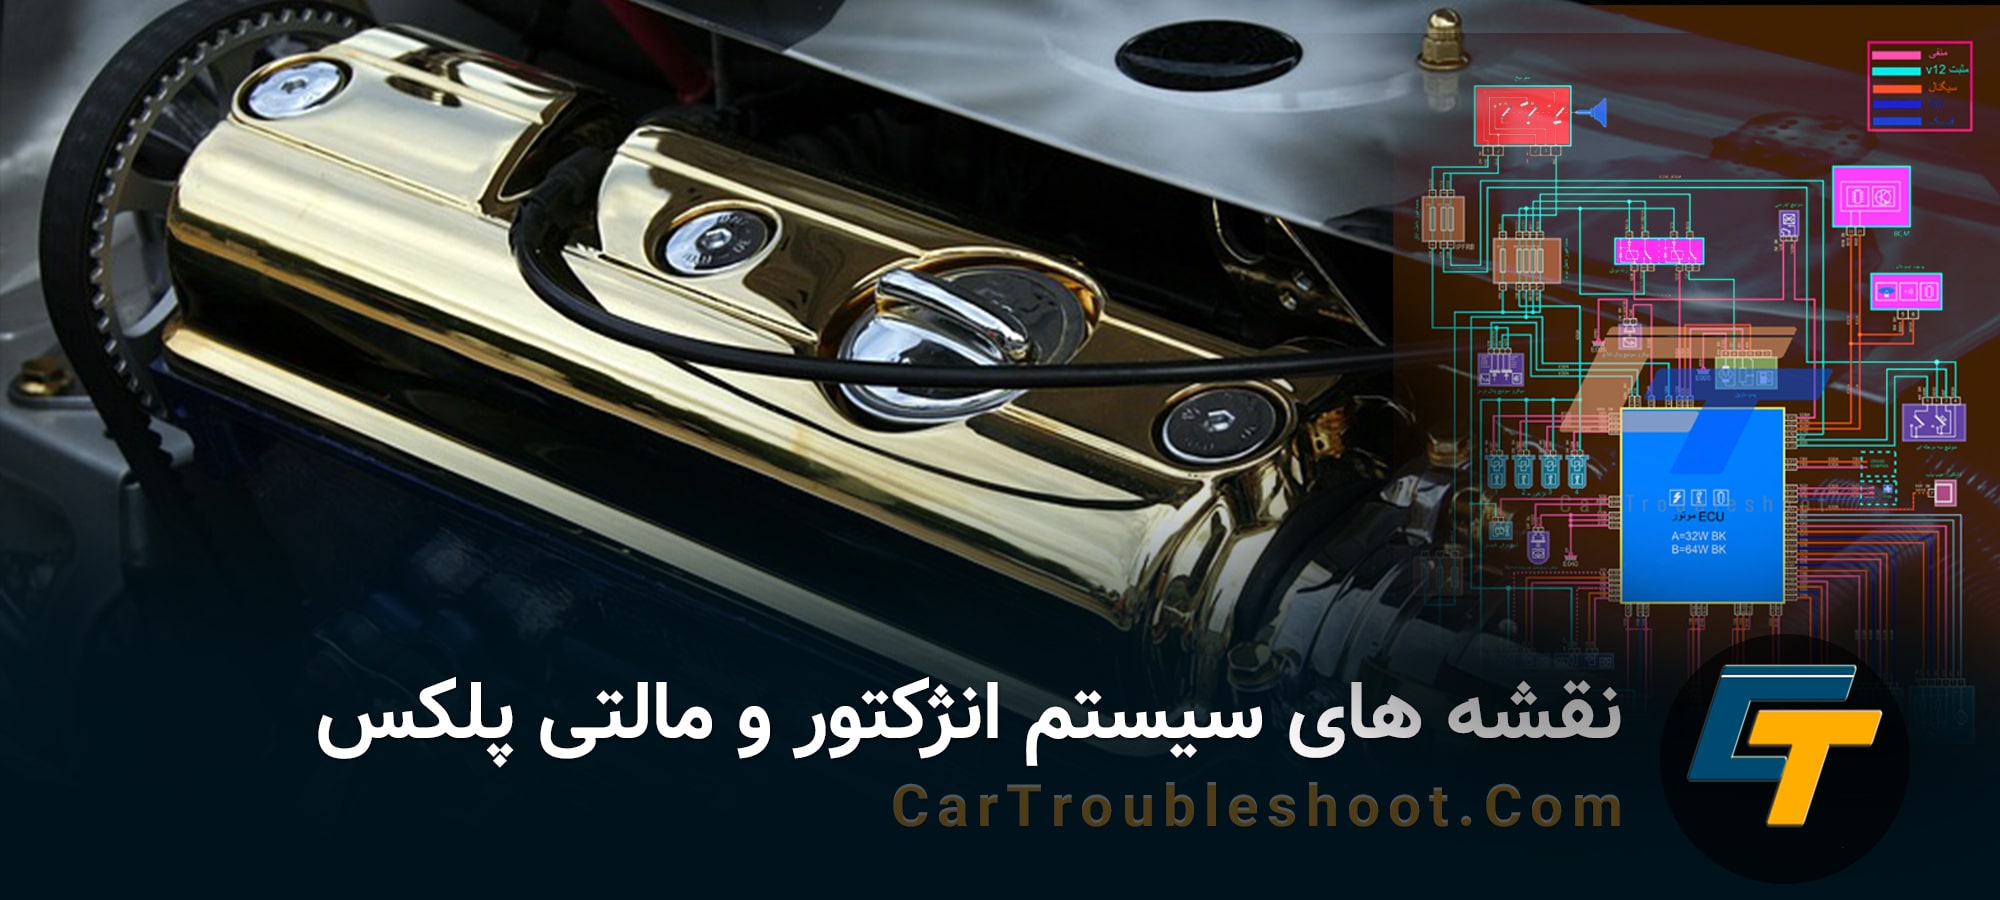 Cartroubleshoot